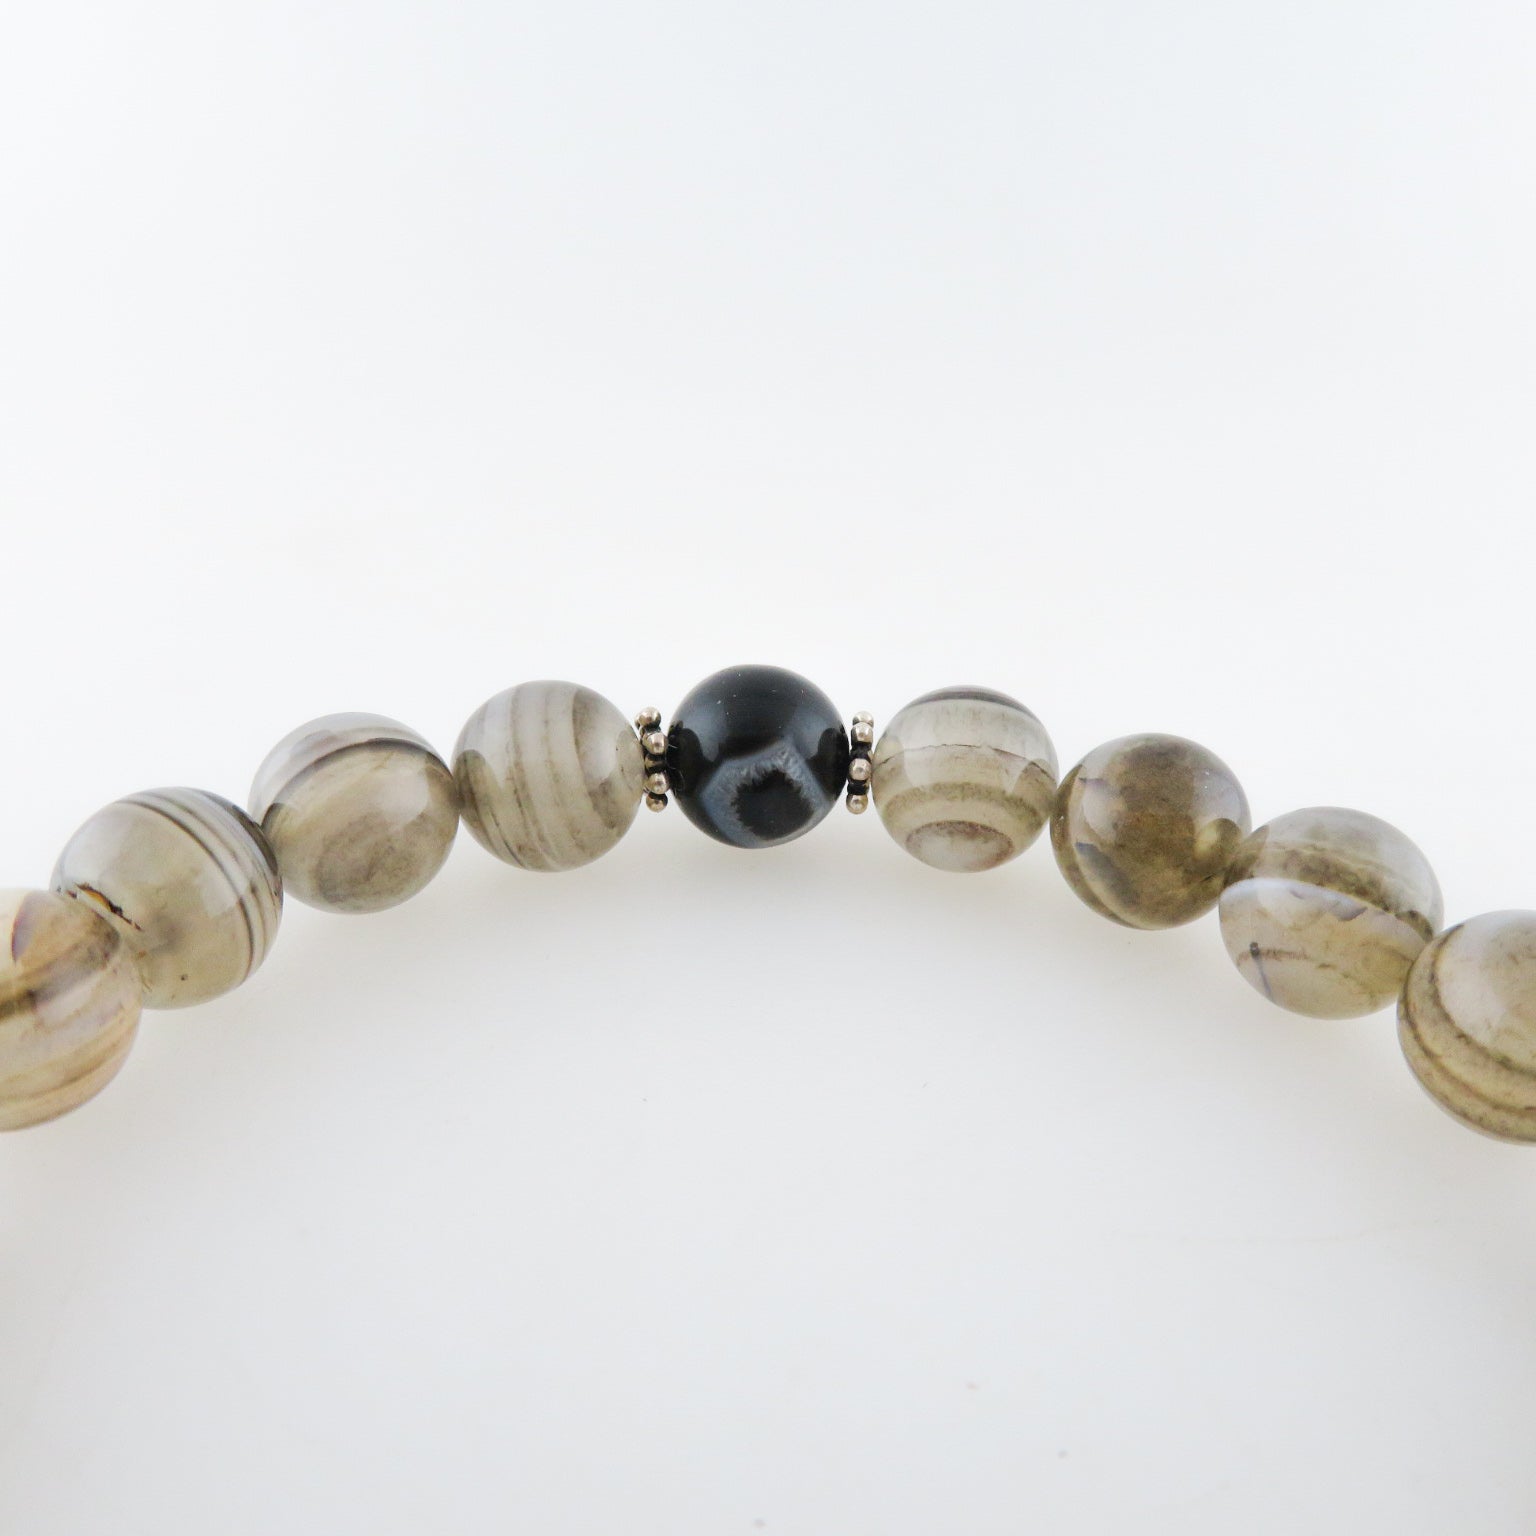 Agate Beads Bracelet with Silver Beads